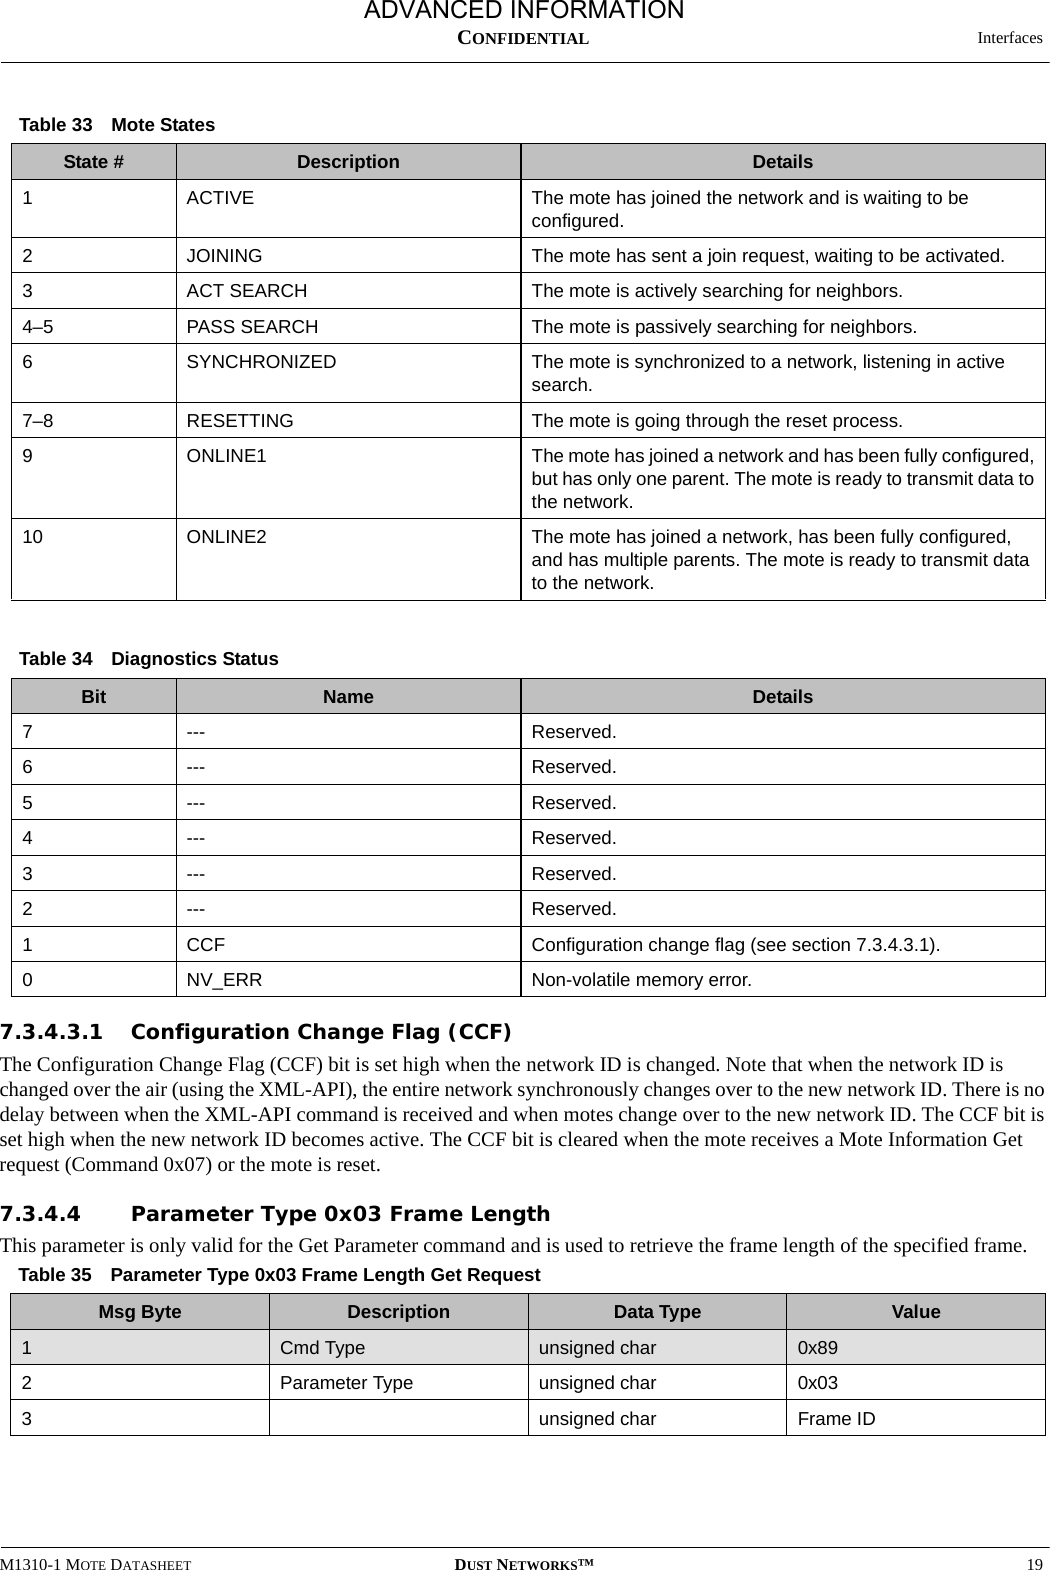  InterfacesM1310-1 MOTE DATASHEET DUST NETWORKS™19CONFIDENTIAL7.3.4.3.1 Configuration Change Flag (CCF)The Configuration Change Flag (CCF) bit is set high when the network ID is changed. Note that when the network ID is changed over the air (using the XML-API), the entire network synchronously changes over to the new network ID. There is no delay between when the XML-API command is received and when motes change over to the new network ID. The CCF bit is set high when the new network ID becomes active. The CCF bit is cleared when the mote receives a Mote Information Get request (Command 0x07) or the mote is reset.7.3.4.4 Parameter Type 0x03 Frame LengthThis parameter is only valid for the Get Parameter command and is used to retrieve the frame length of the specified frame.Table 33 Mote StatesState # Description Details1ACTIVE The mote has joined the network and is waiting to be configured.2JOINING The mote has sent a join request, waiting to be activated.3ACT SEARCH The mote is actively searching for neighbors.4–5 PASS SEARCH The mote is passively searching for neighbors.6SYNCHRONIZED The mote is synchronized to a network, listening in active search.7–8 RESETTING The mote is going through the reset process.9ONLINE1 The mote has joined a network and has been fully configured, but has only one parent. The mote is ready to transmit data to the network.10 ONLINE2 The mote has joined a network, has been fully configured, and has multiple parents. The mote is ready to transmit data to the network.Table 34 Diagnostics StatusBit Name Details7--- Reserved.6--- Reserved.5--- Reserved.4--- Reserved.3--- Reserved.2--- Reserved.1CCF Configuration change flag (see section 7.3.4.3.1).0NV_ERR Non-volatile memory error.Table 35 Parameter Type 0x03 Frame Length Get RequestMsg Byte Description Data Type Value1Cmd Type unsigned char 0x892Parameter Type unsigned char 0x033unsigned char Frame IDADVANCED INFORMATION